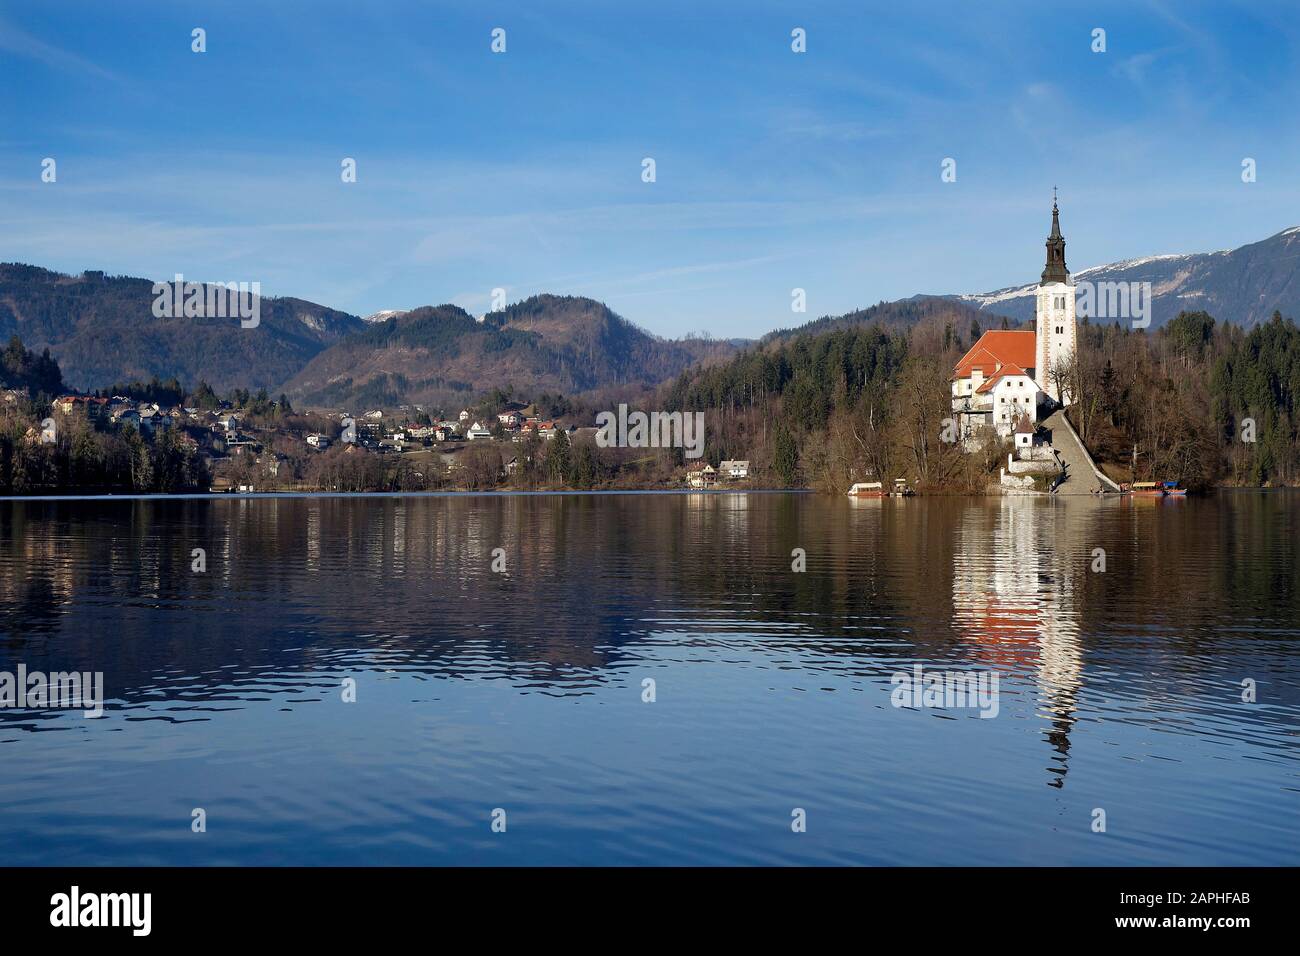 Bled Isle with the pilgrimage church dedicated to Assumption of Mary, Bled, Slovenia Stock Photo